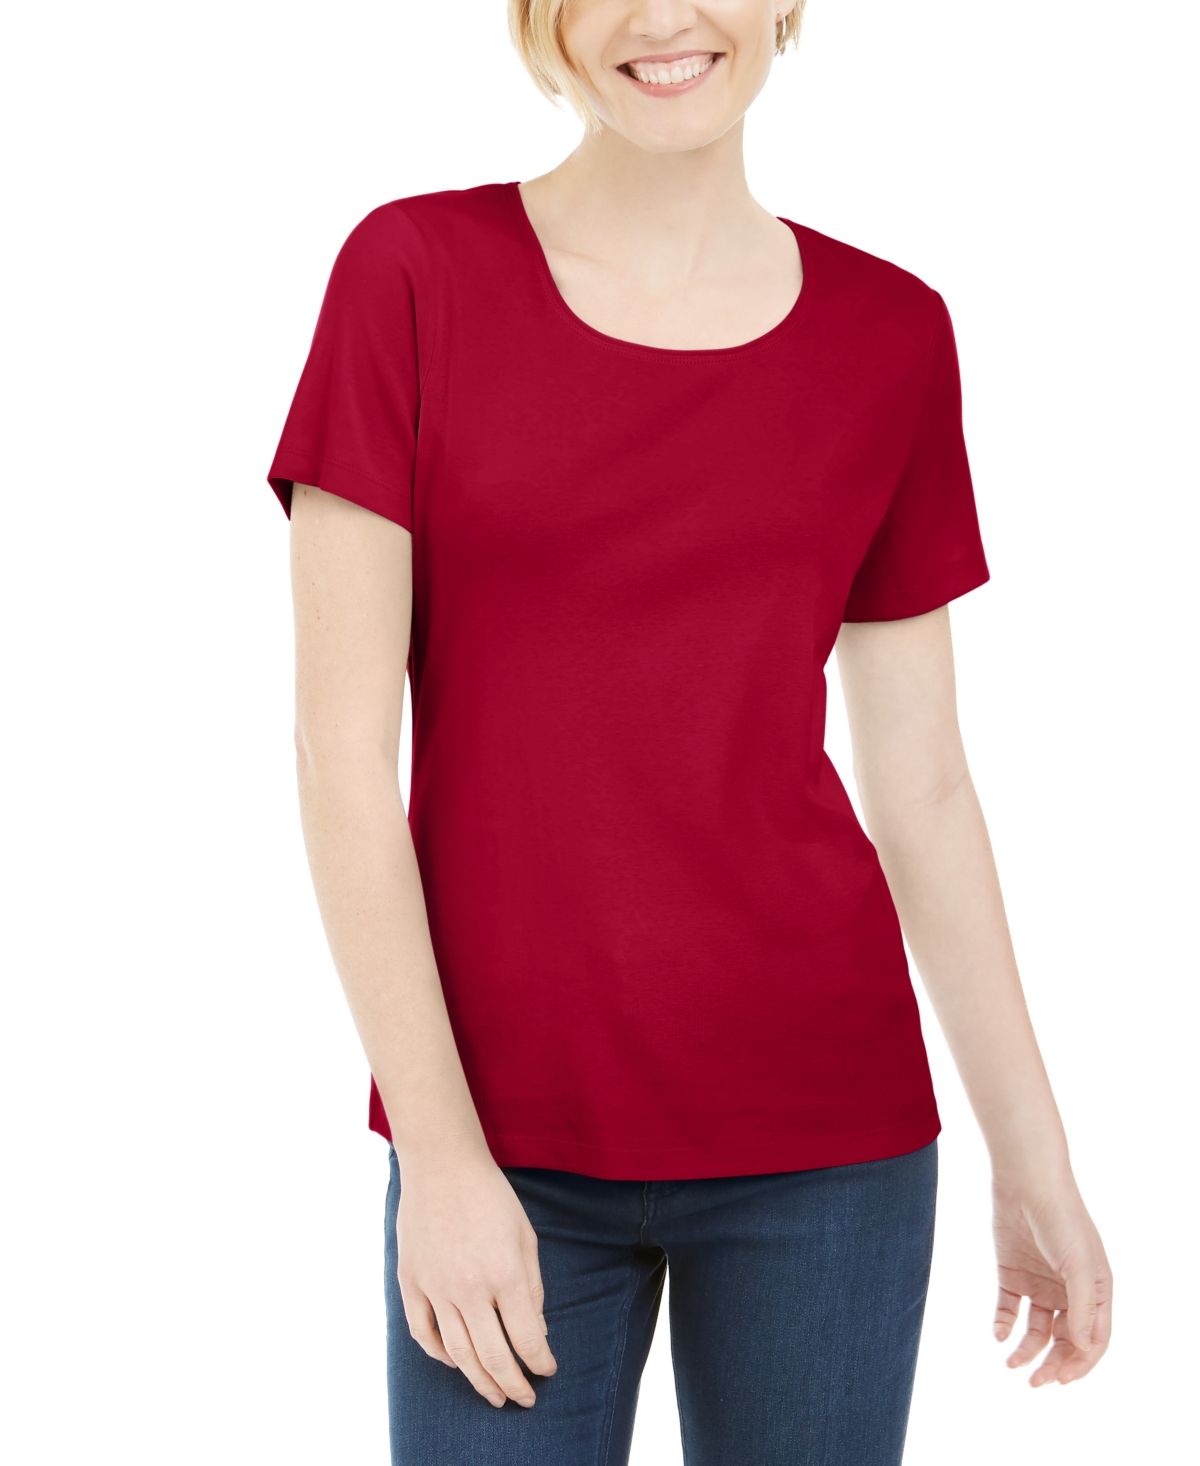 Short Sleeve Scoop Neck Top, Created for Macy's - New Red Amore